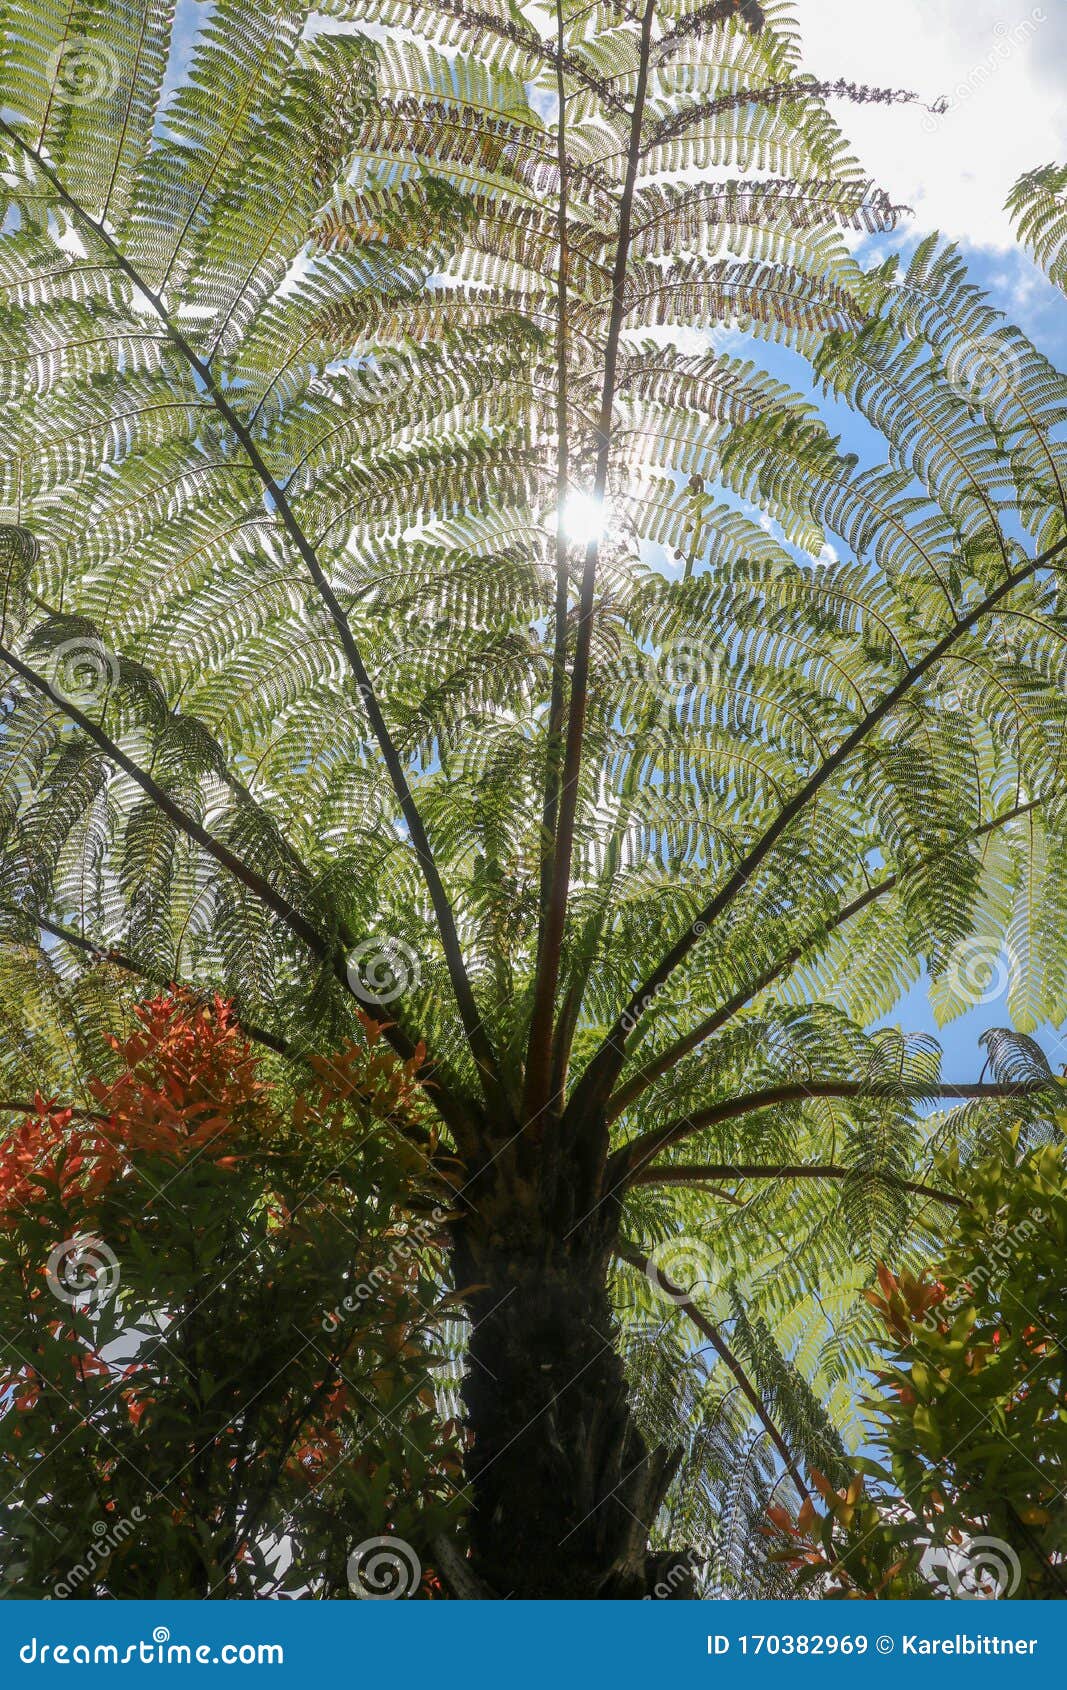 the midday sun shines through the crown of the tropical tree cyathea arborea. sun rays pass through the branches of west indian